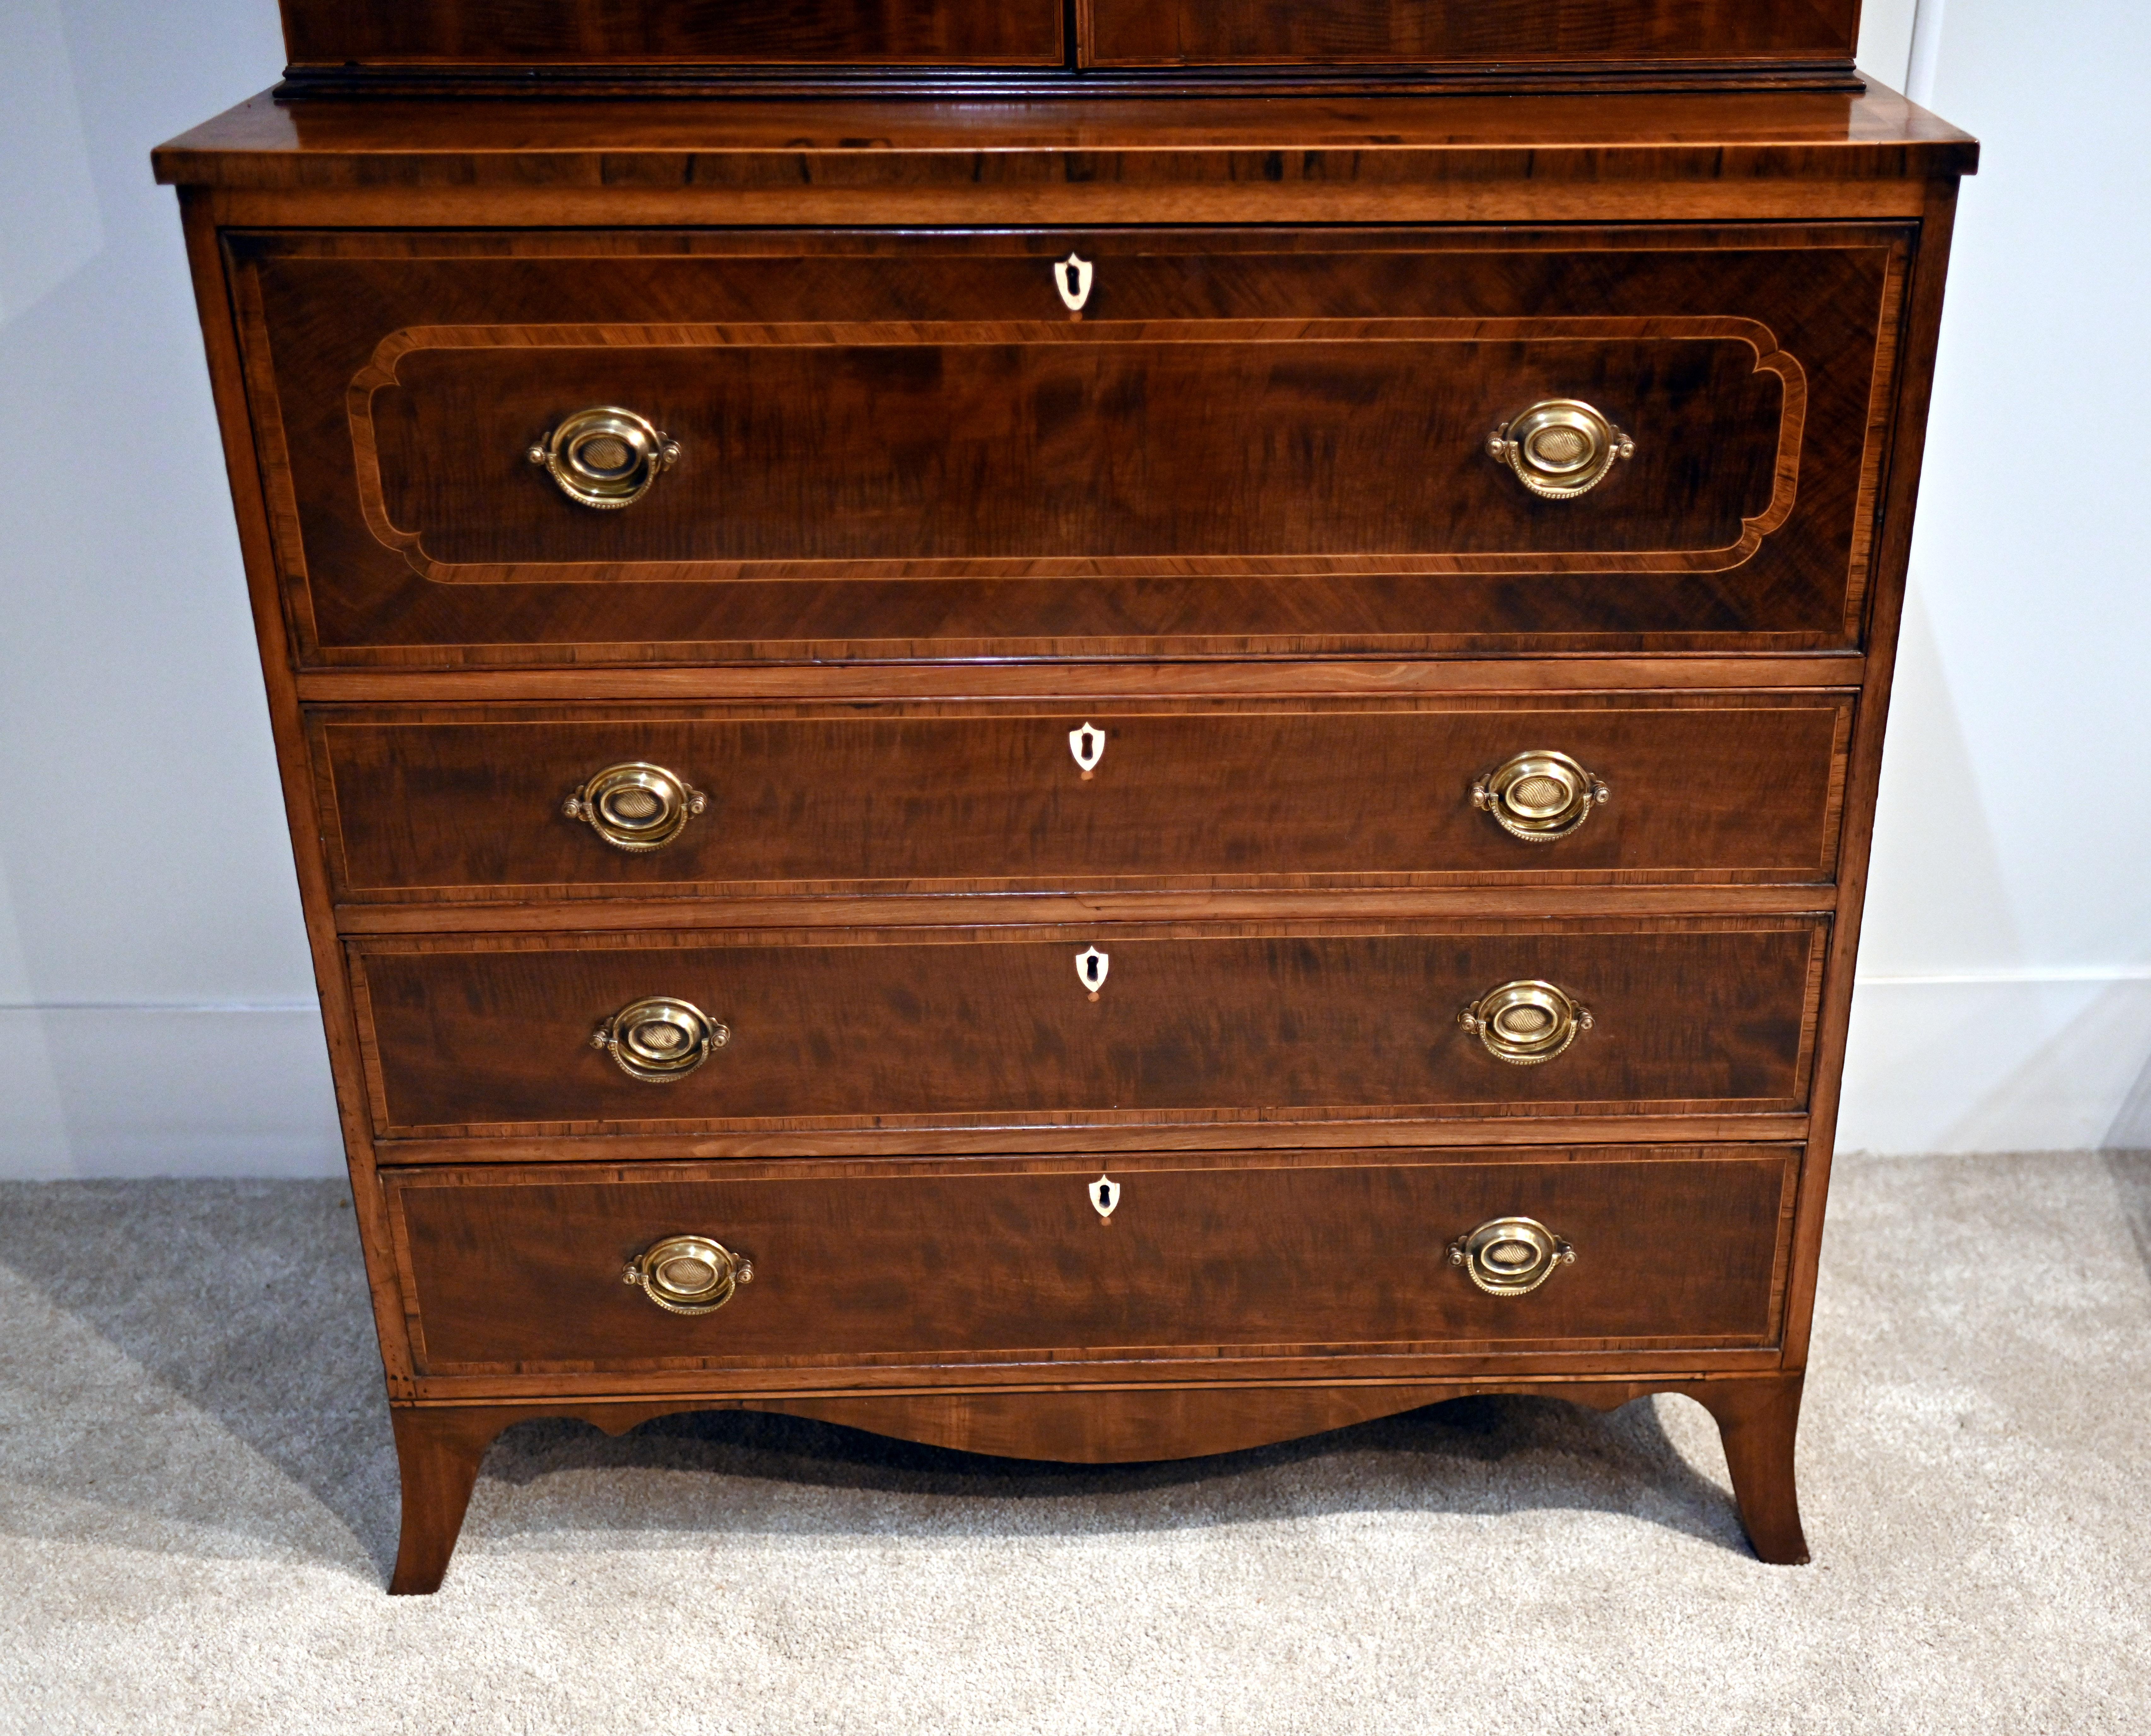 Simply stunning George III secretaire bookcase in mahogany Lovingly restored so in great shape Lots of storage with drawers below and glass covered bookcase to the top Desk section - secretaire - opens out to reveal writing surface surrounded by